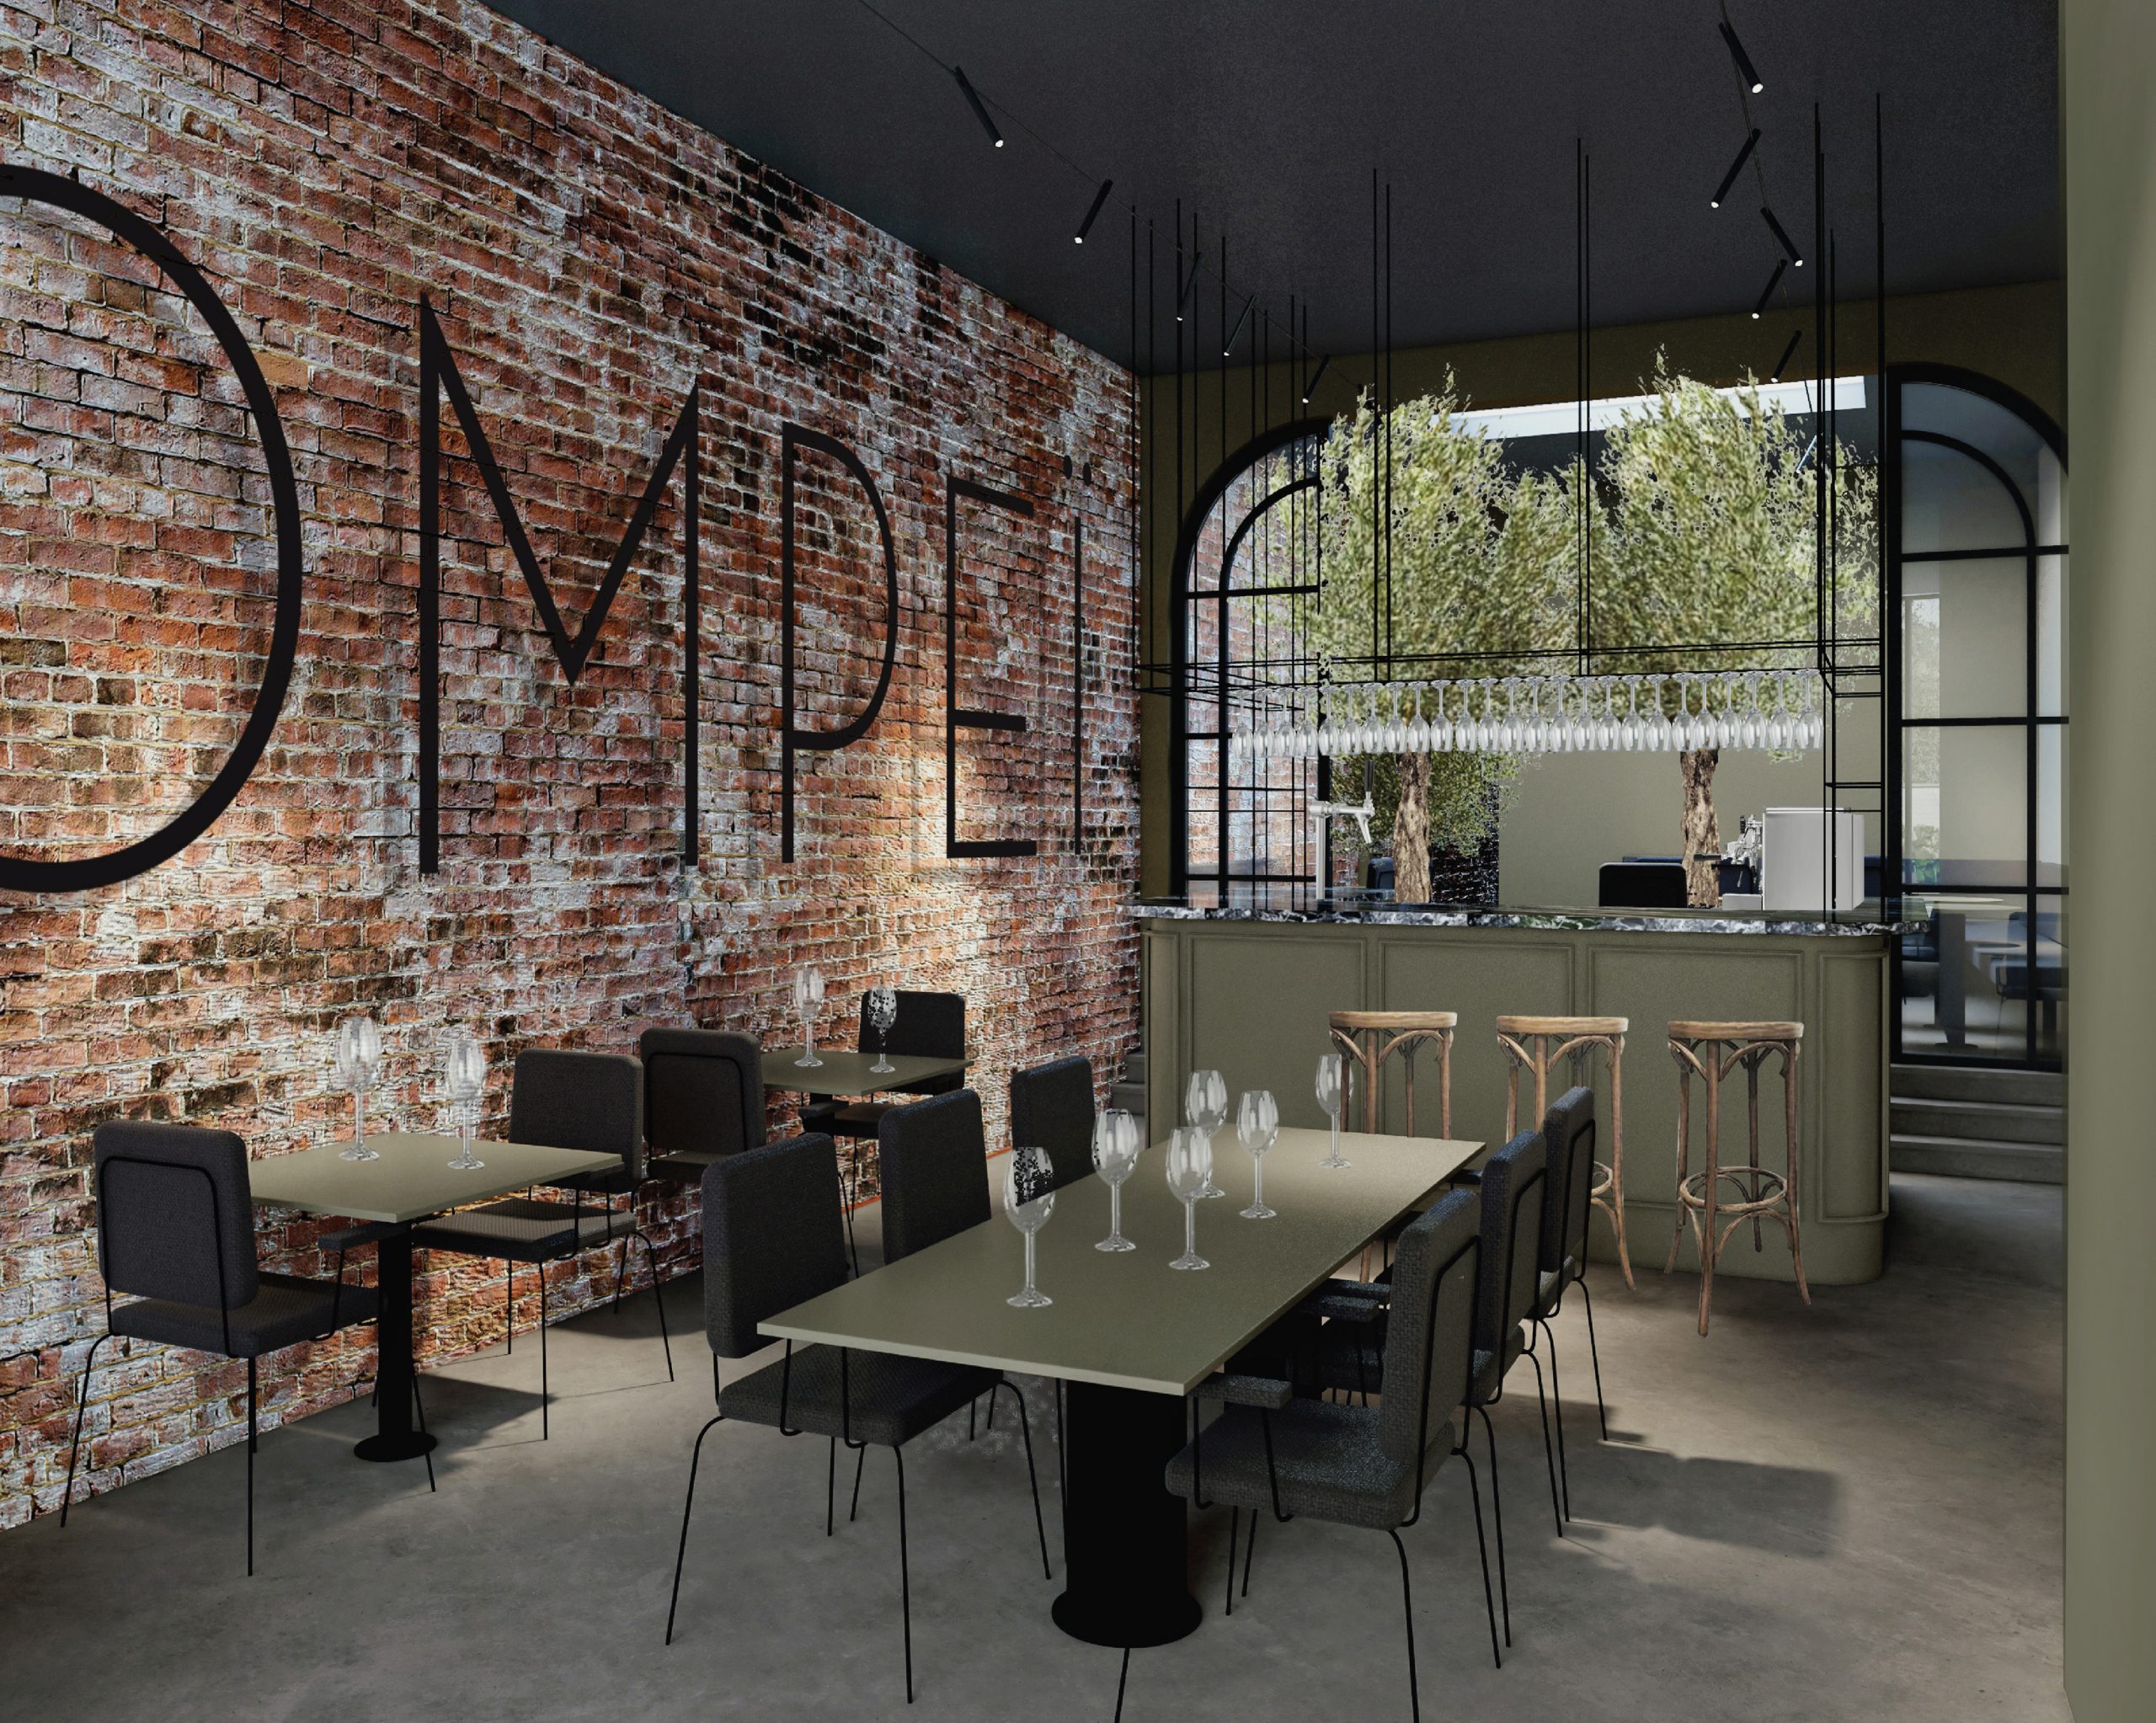 project: vintoteca pompei

This vinoteca (winebar) likes to invite people discovering Italian wines.The interior combines raw en vinted style elements with classic materials like marble, velvet and smoked oak wood. Pompei is a part of Napels I used for decoration solutions...